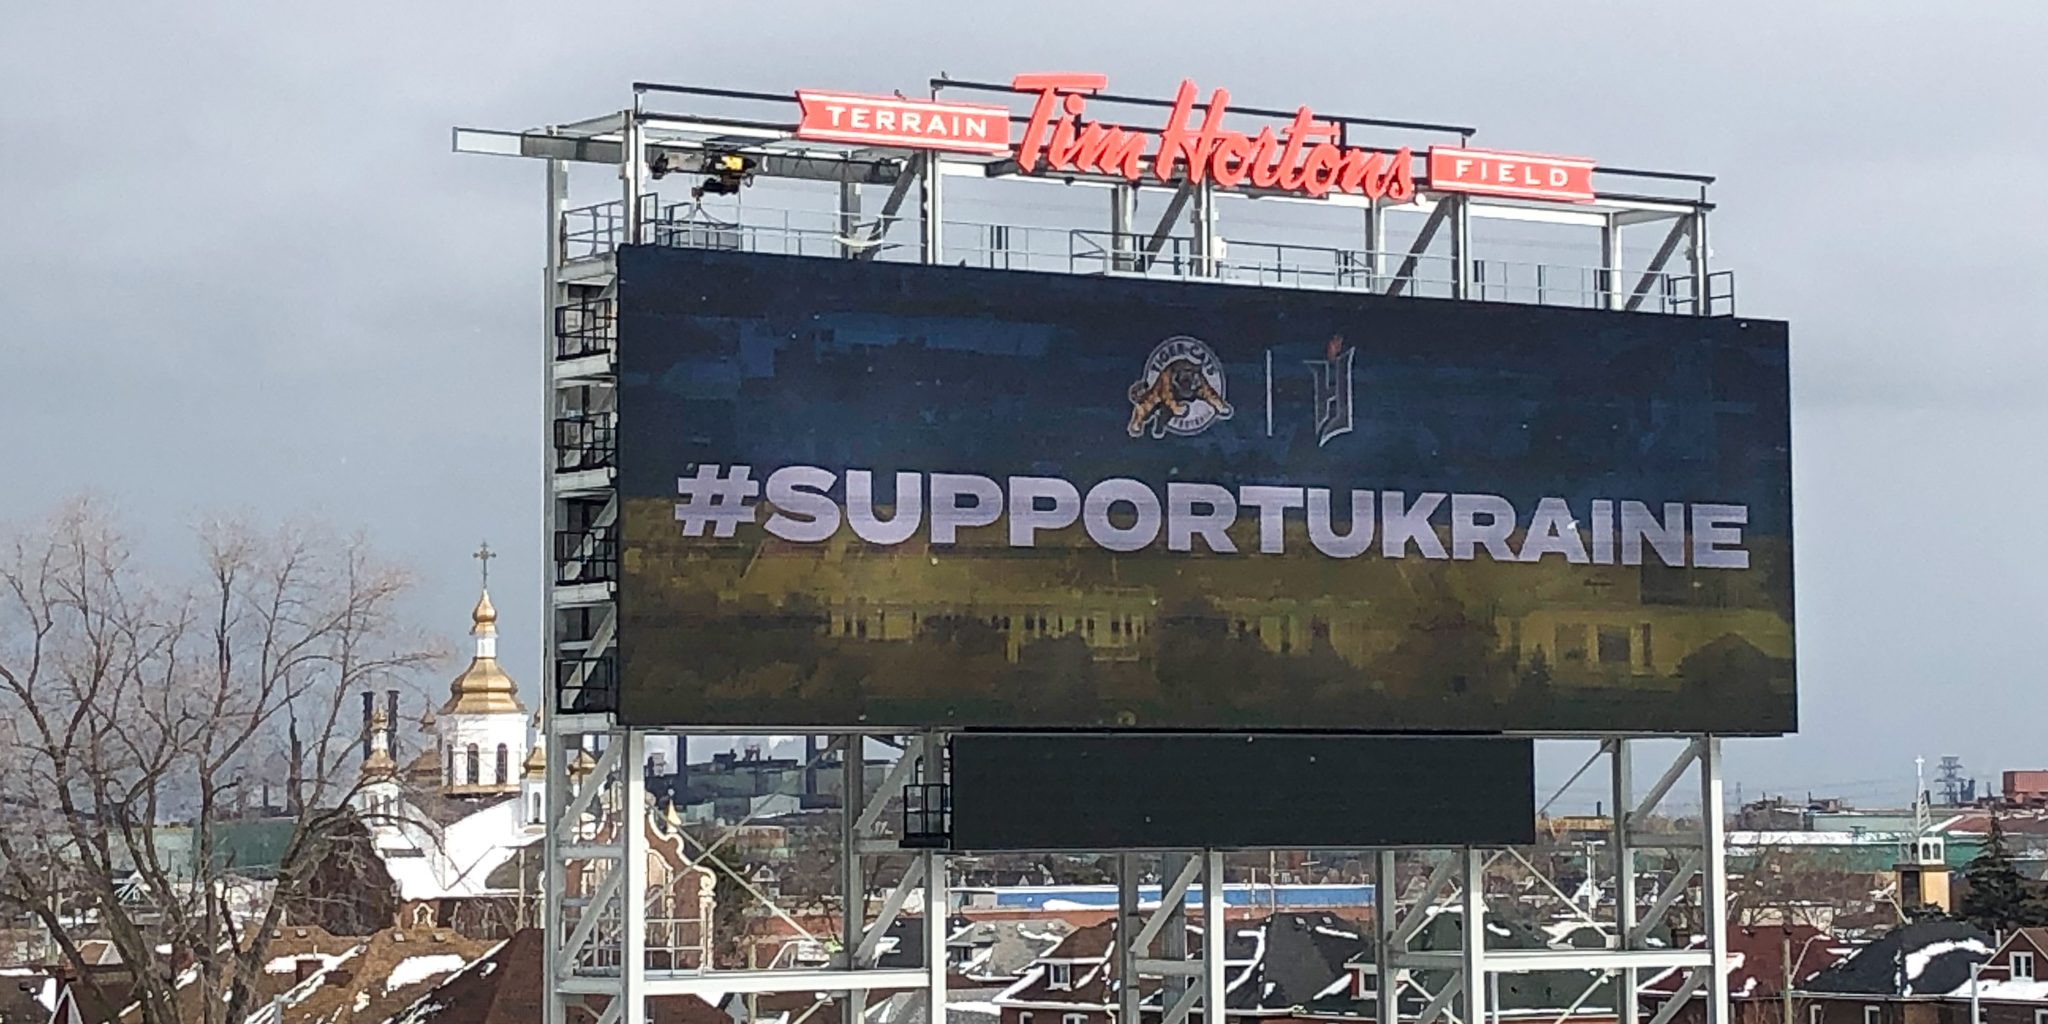 Hamilton Tiger-Cats, Forge FC show support for Ukraine